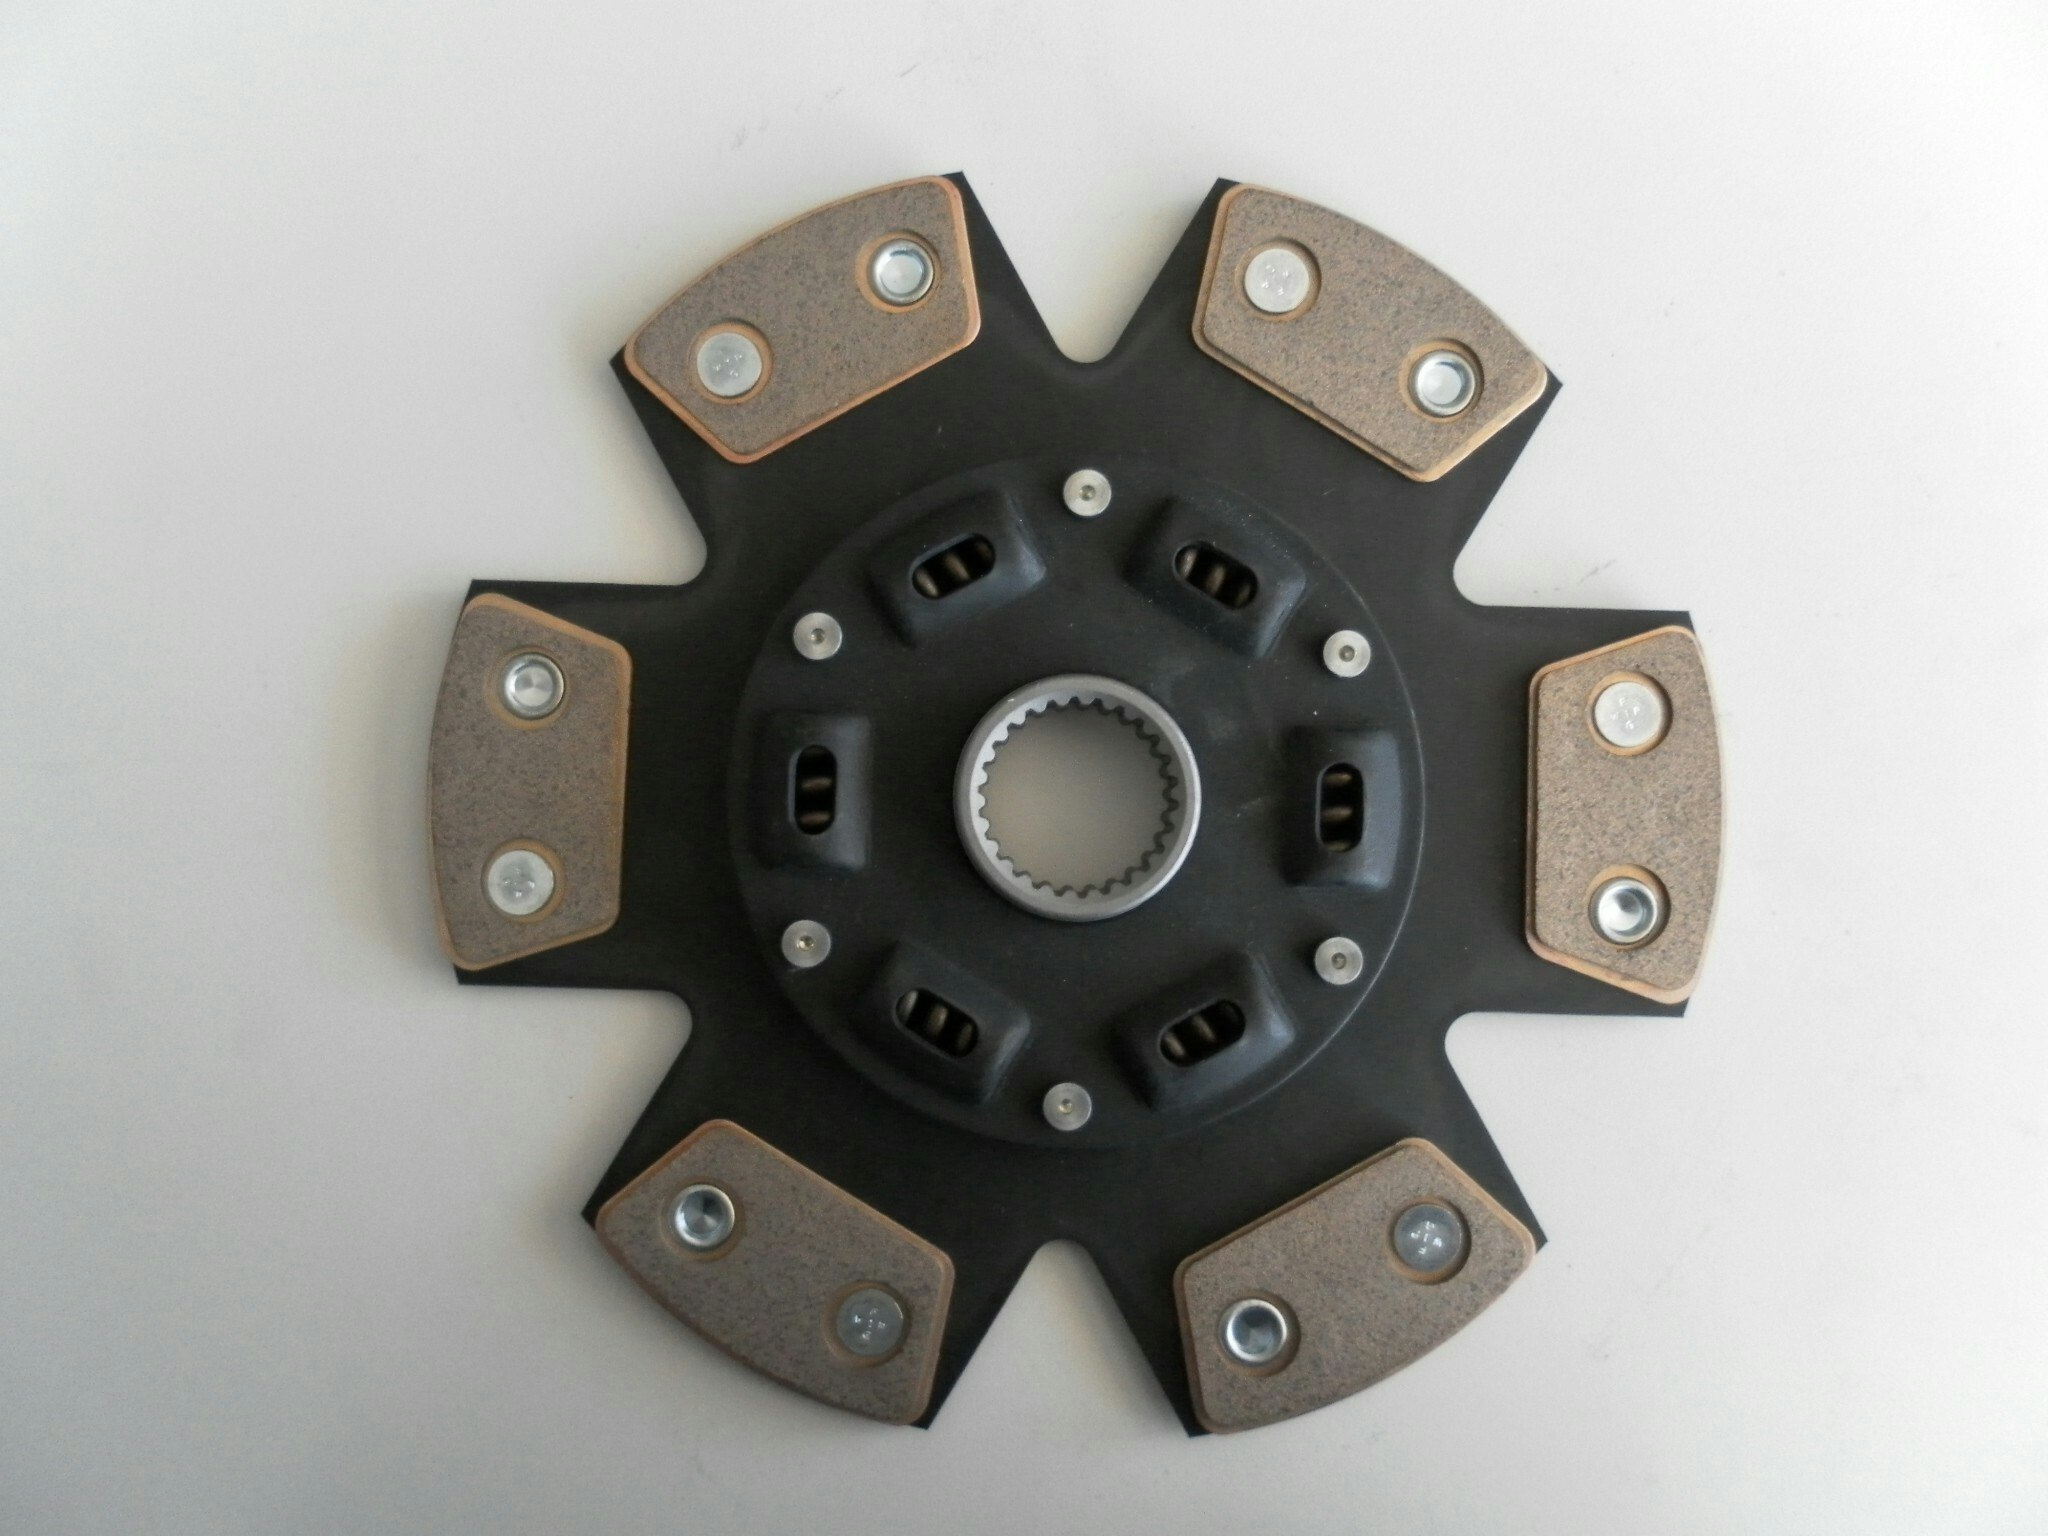 Tenaci 228 mm clutch disc with hub included - 6 pucks and springs.